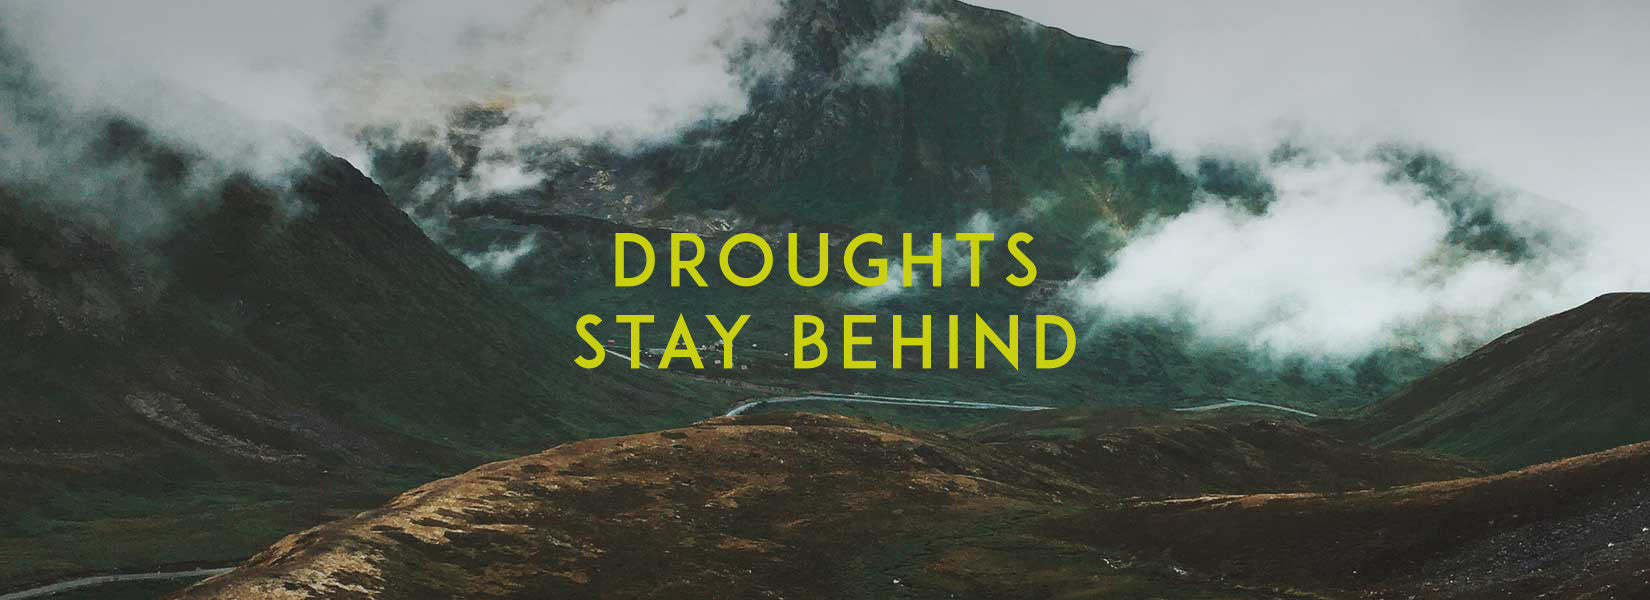 Droughts Announces New Album Stay Behind, Shares New Track "Welcome Home"